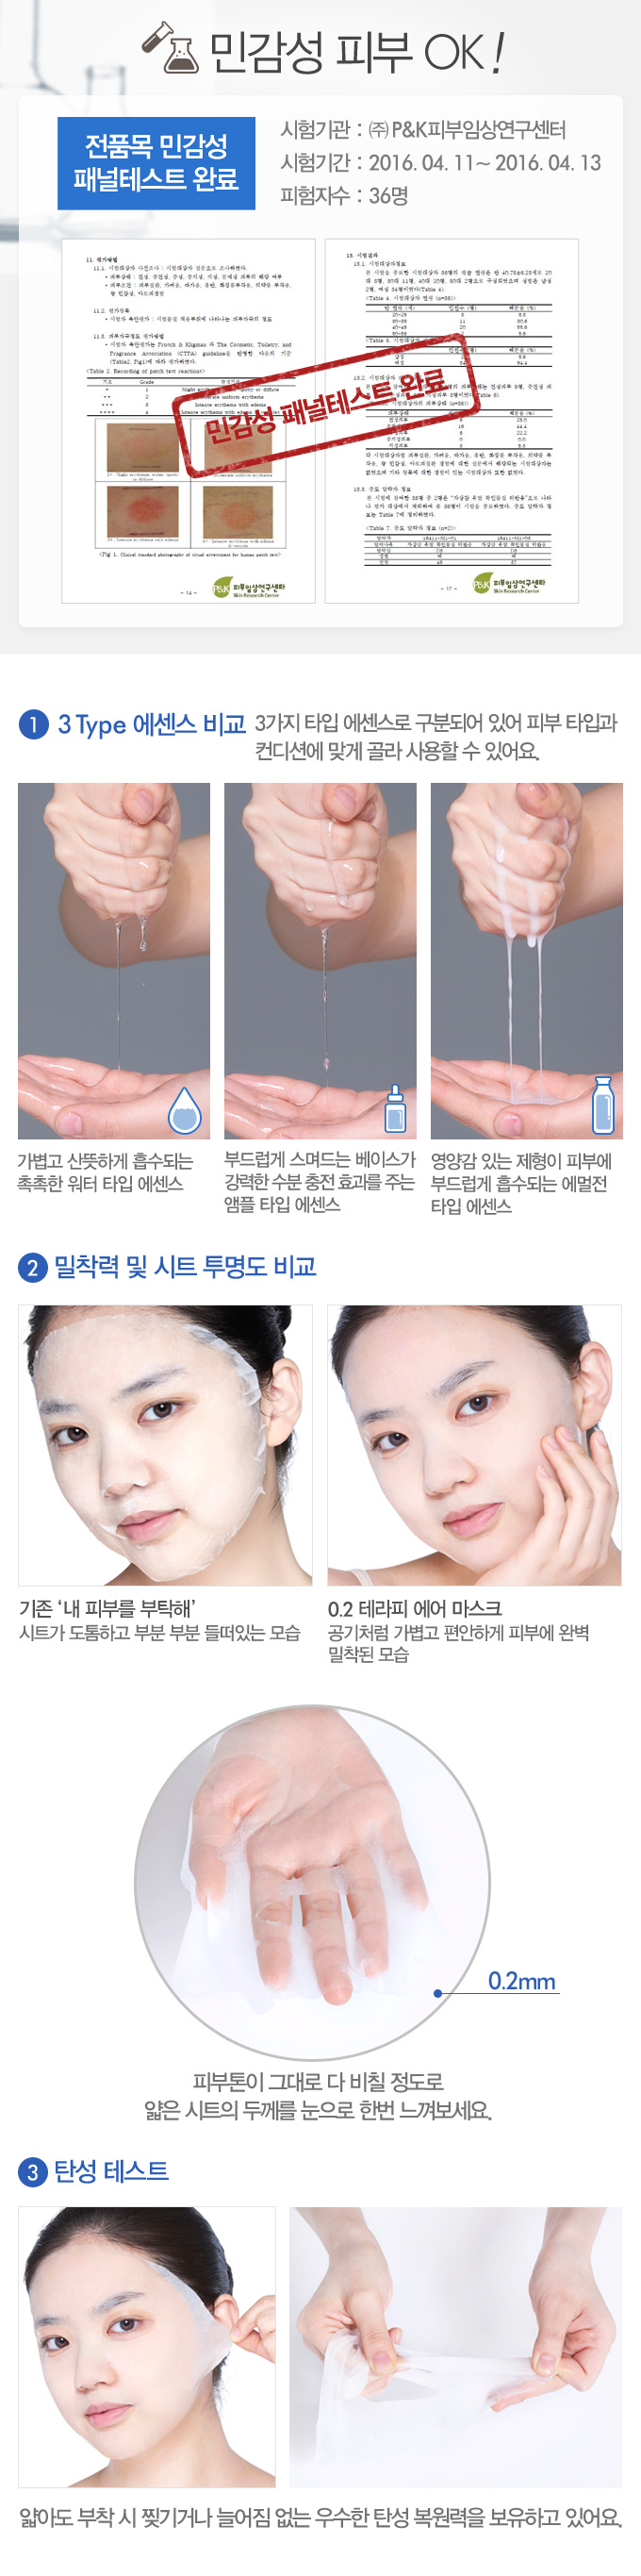 etude-house-therapy-air-mask-2.jpg